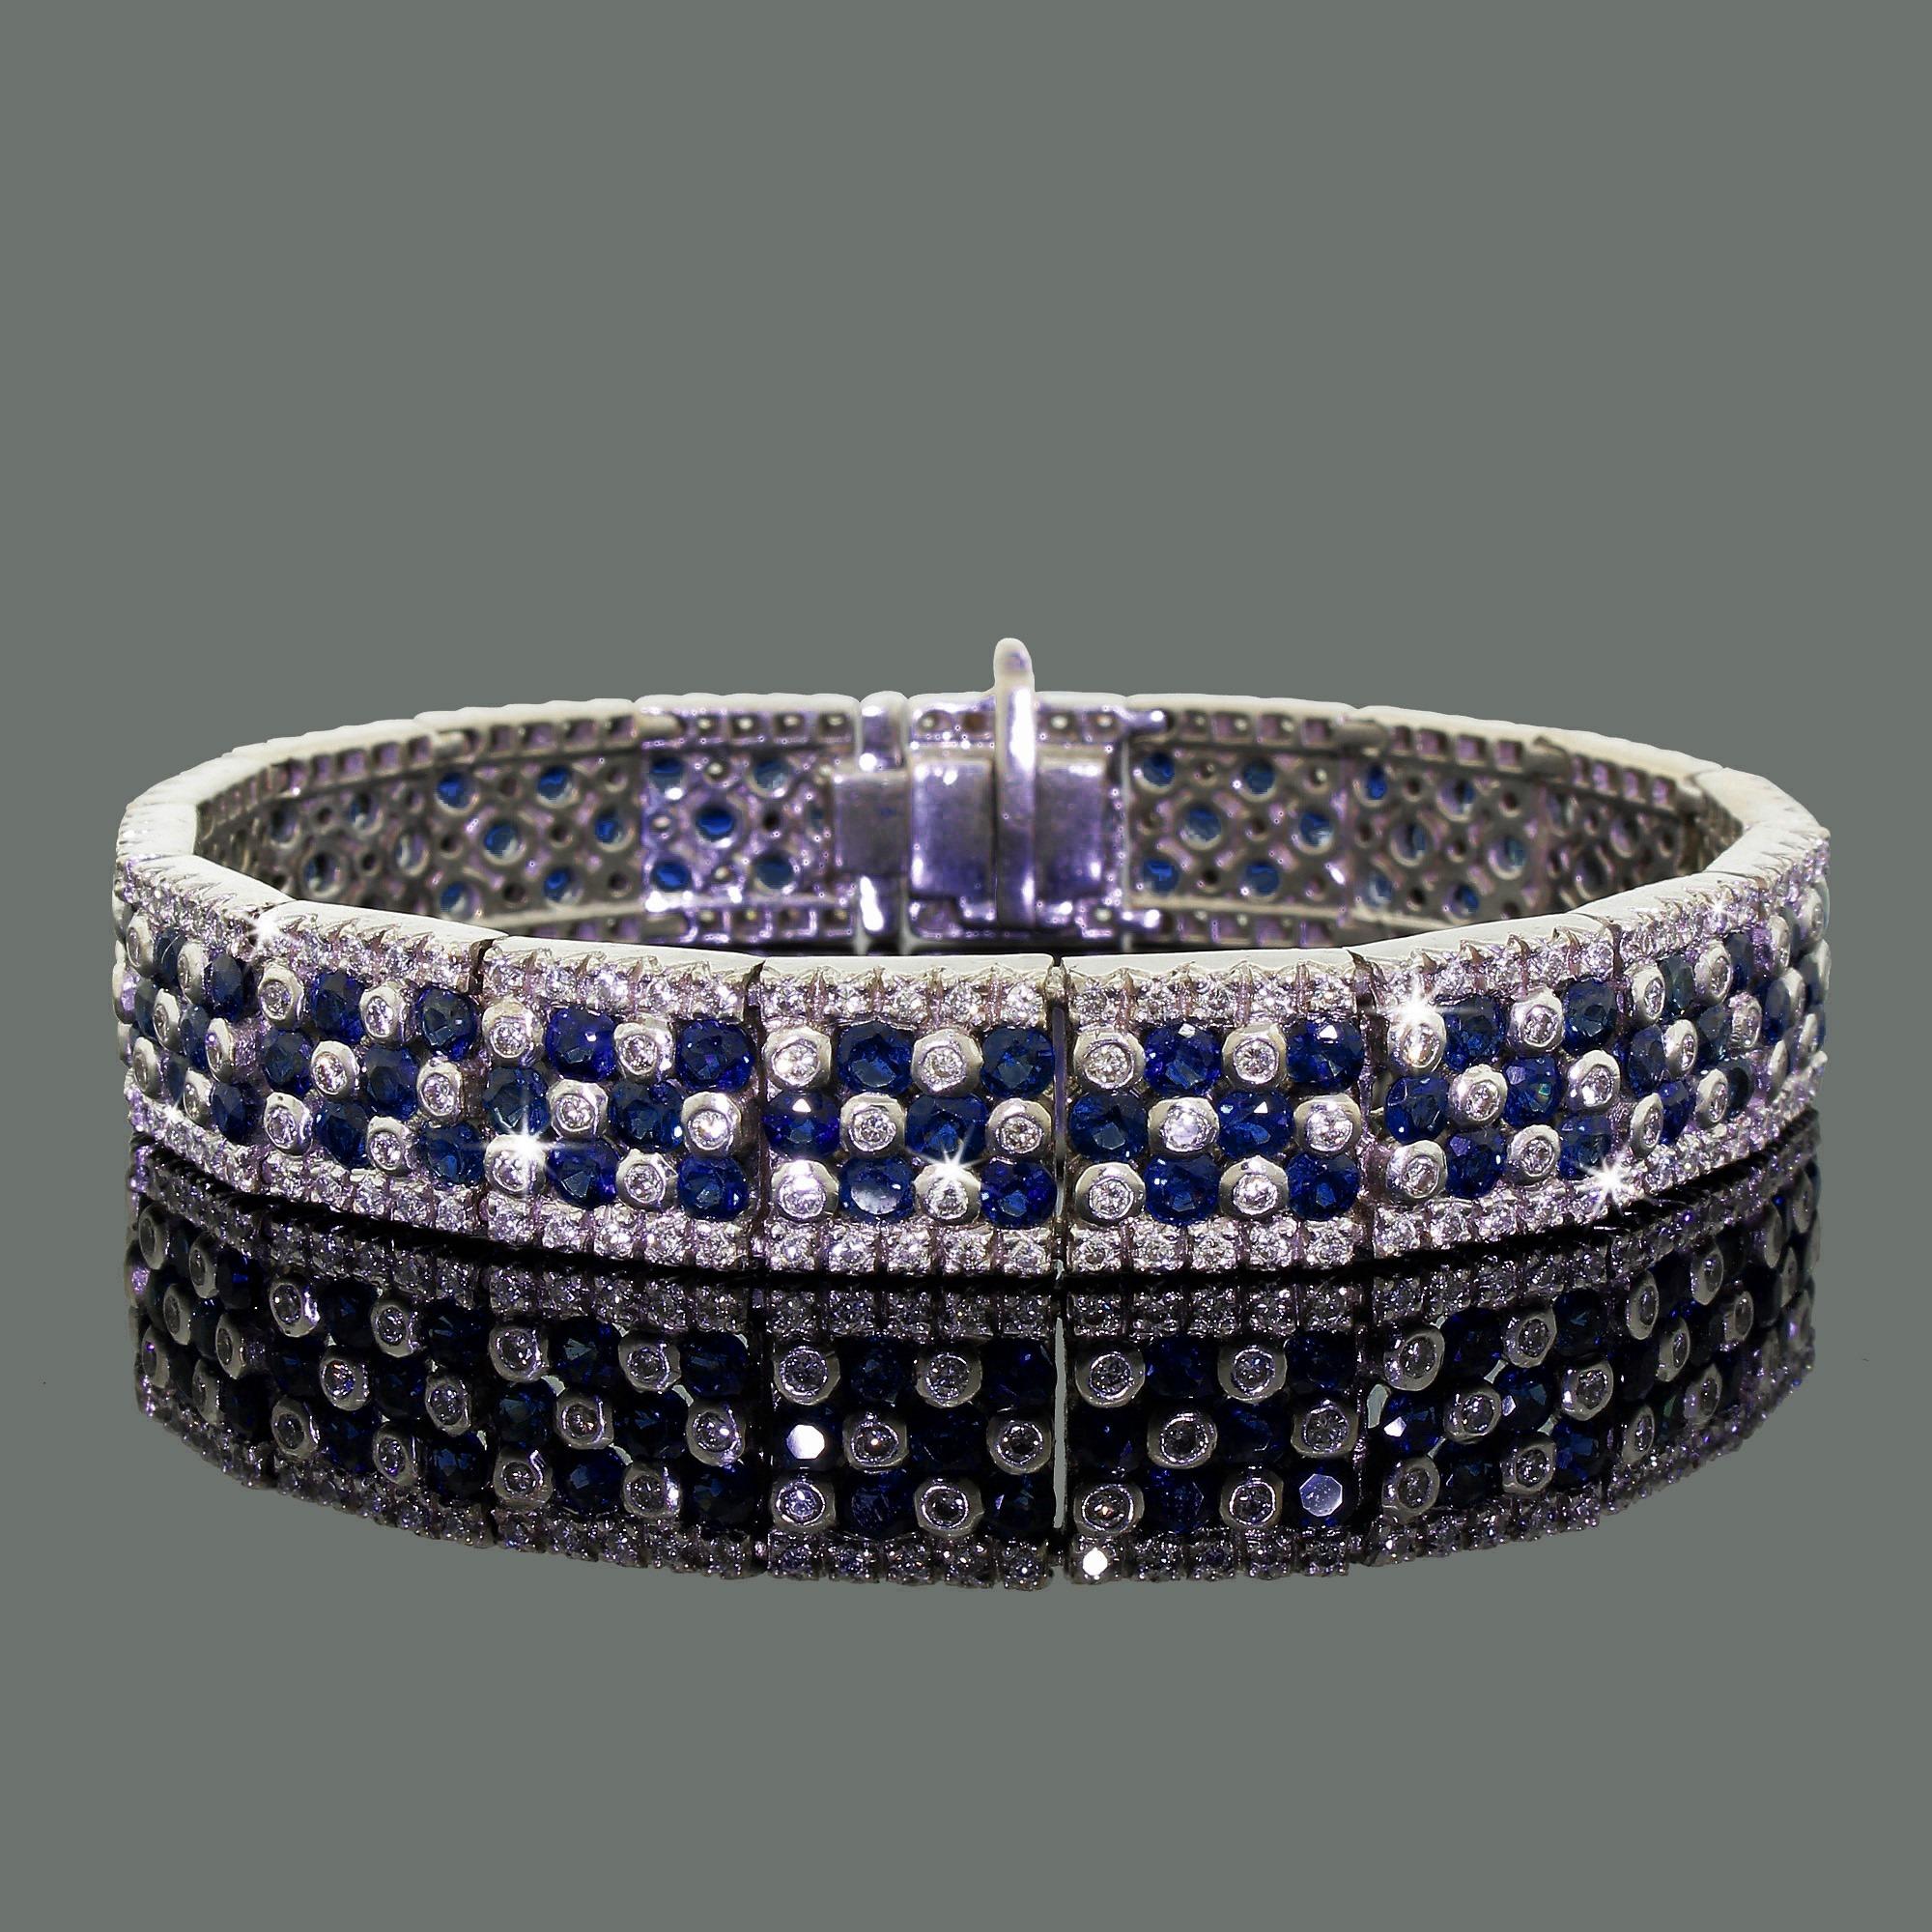 This is a very classy and elegant bracelet in person, lavish 14K white gold encompasses a sea of Diamonds and Sapphires stones.
A beautiful piece of jewelry that is crafted out of gorgeous thick 14K white gold and features 108 genuine Blue